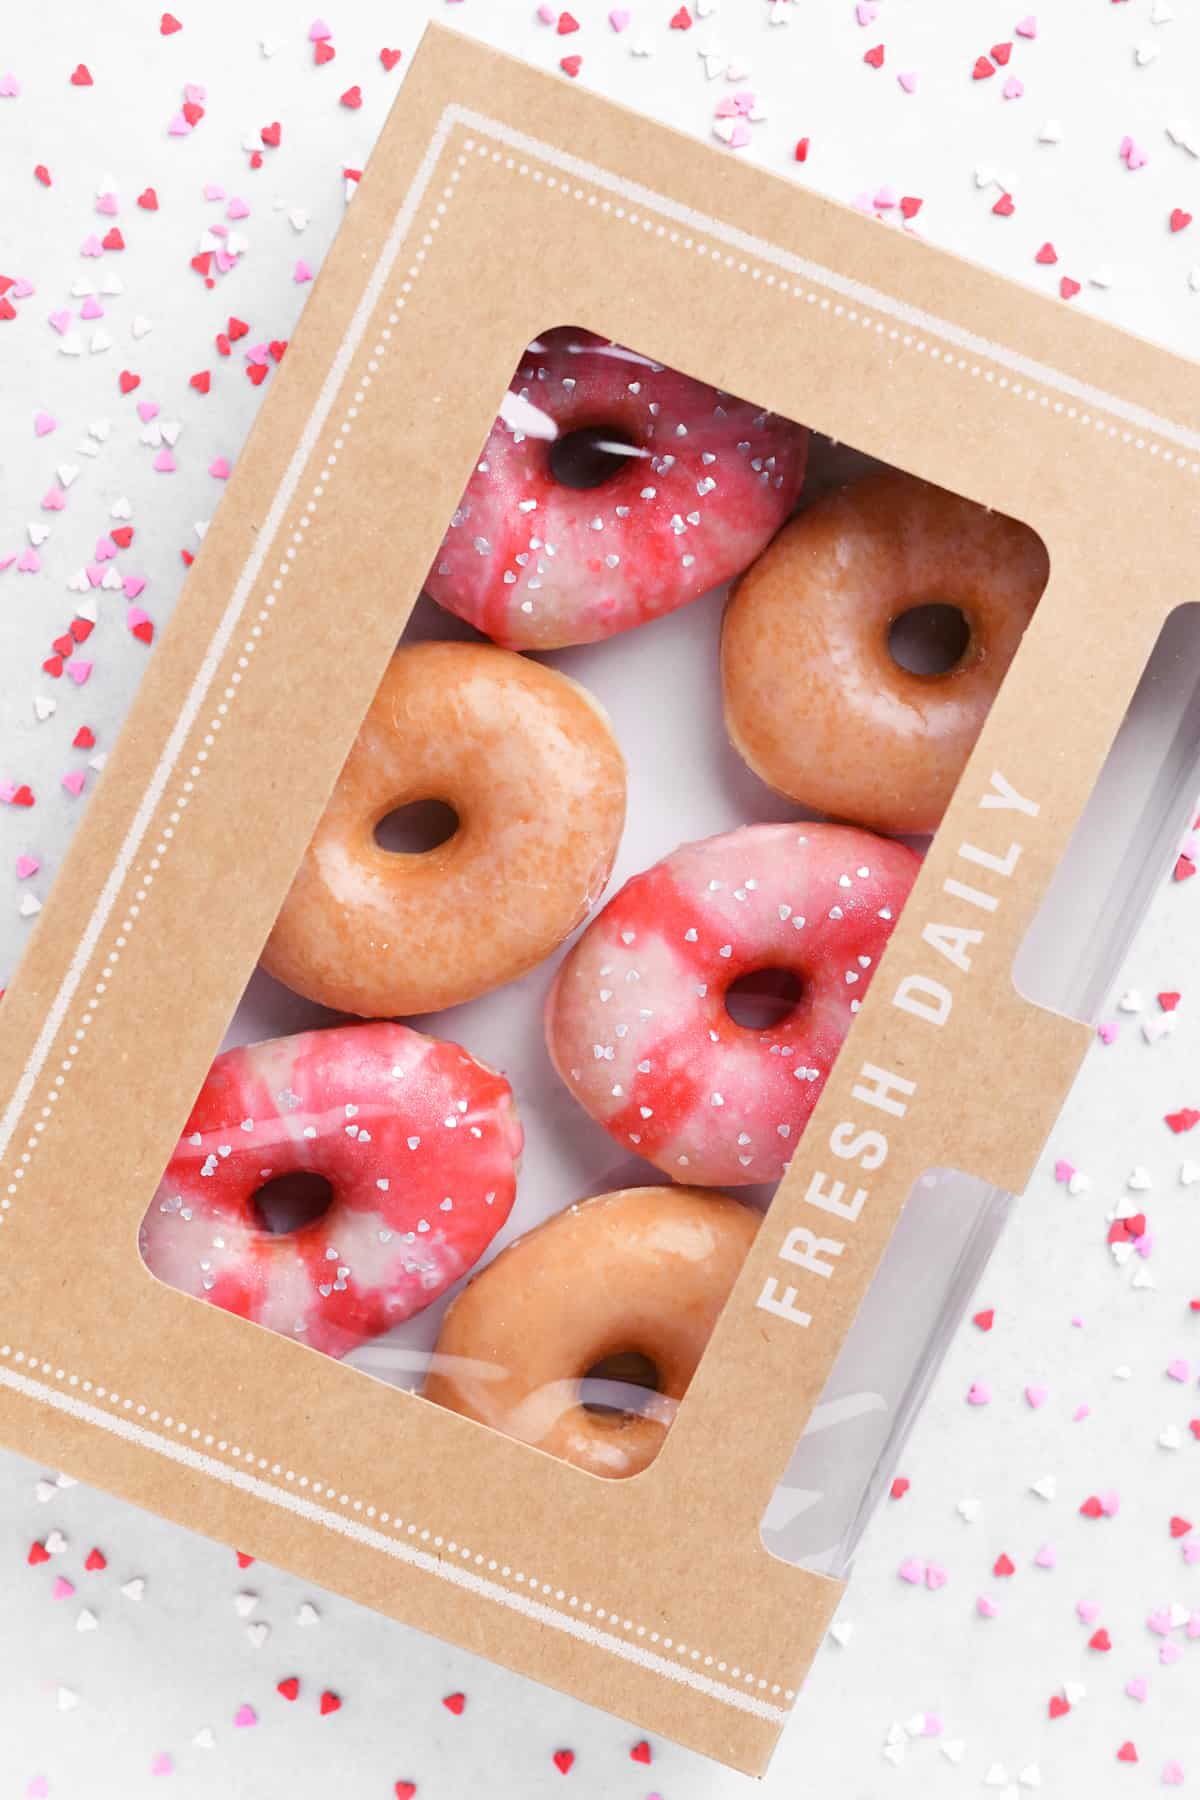 glazed donuts decorated for valentines day in a box